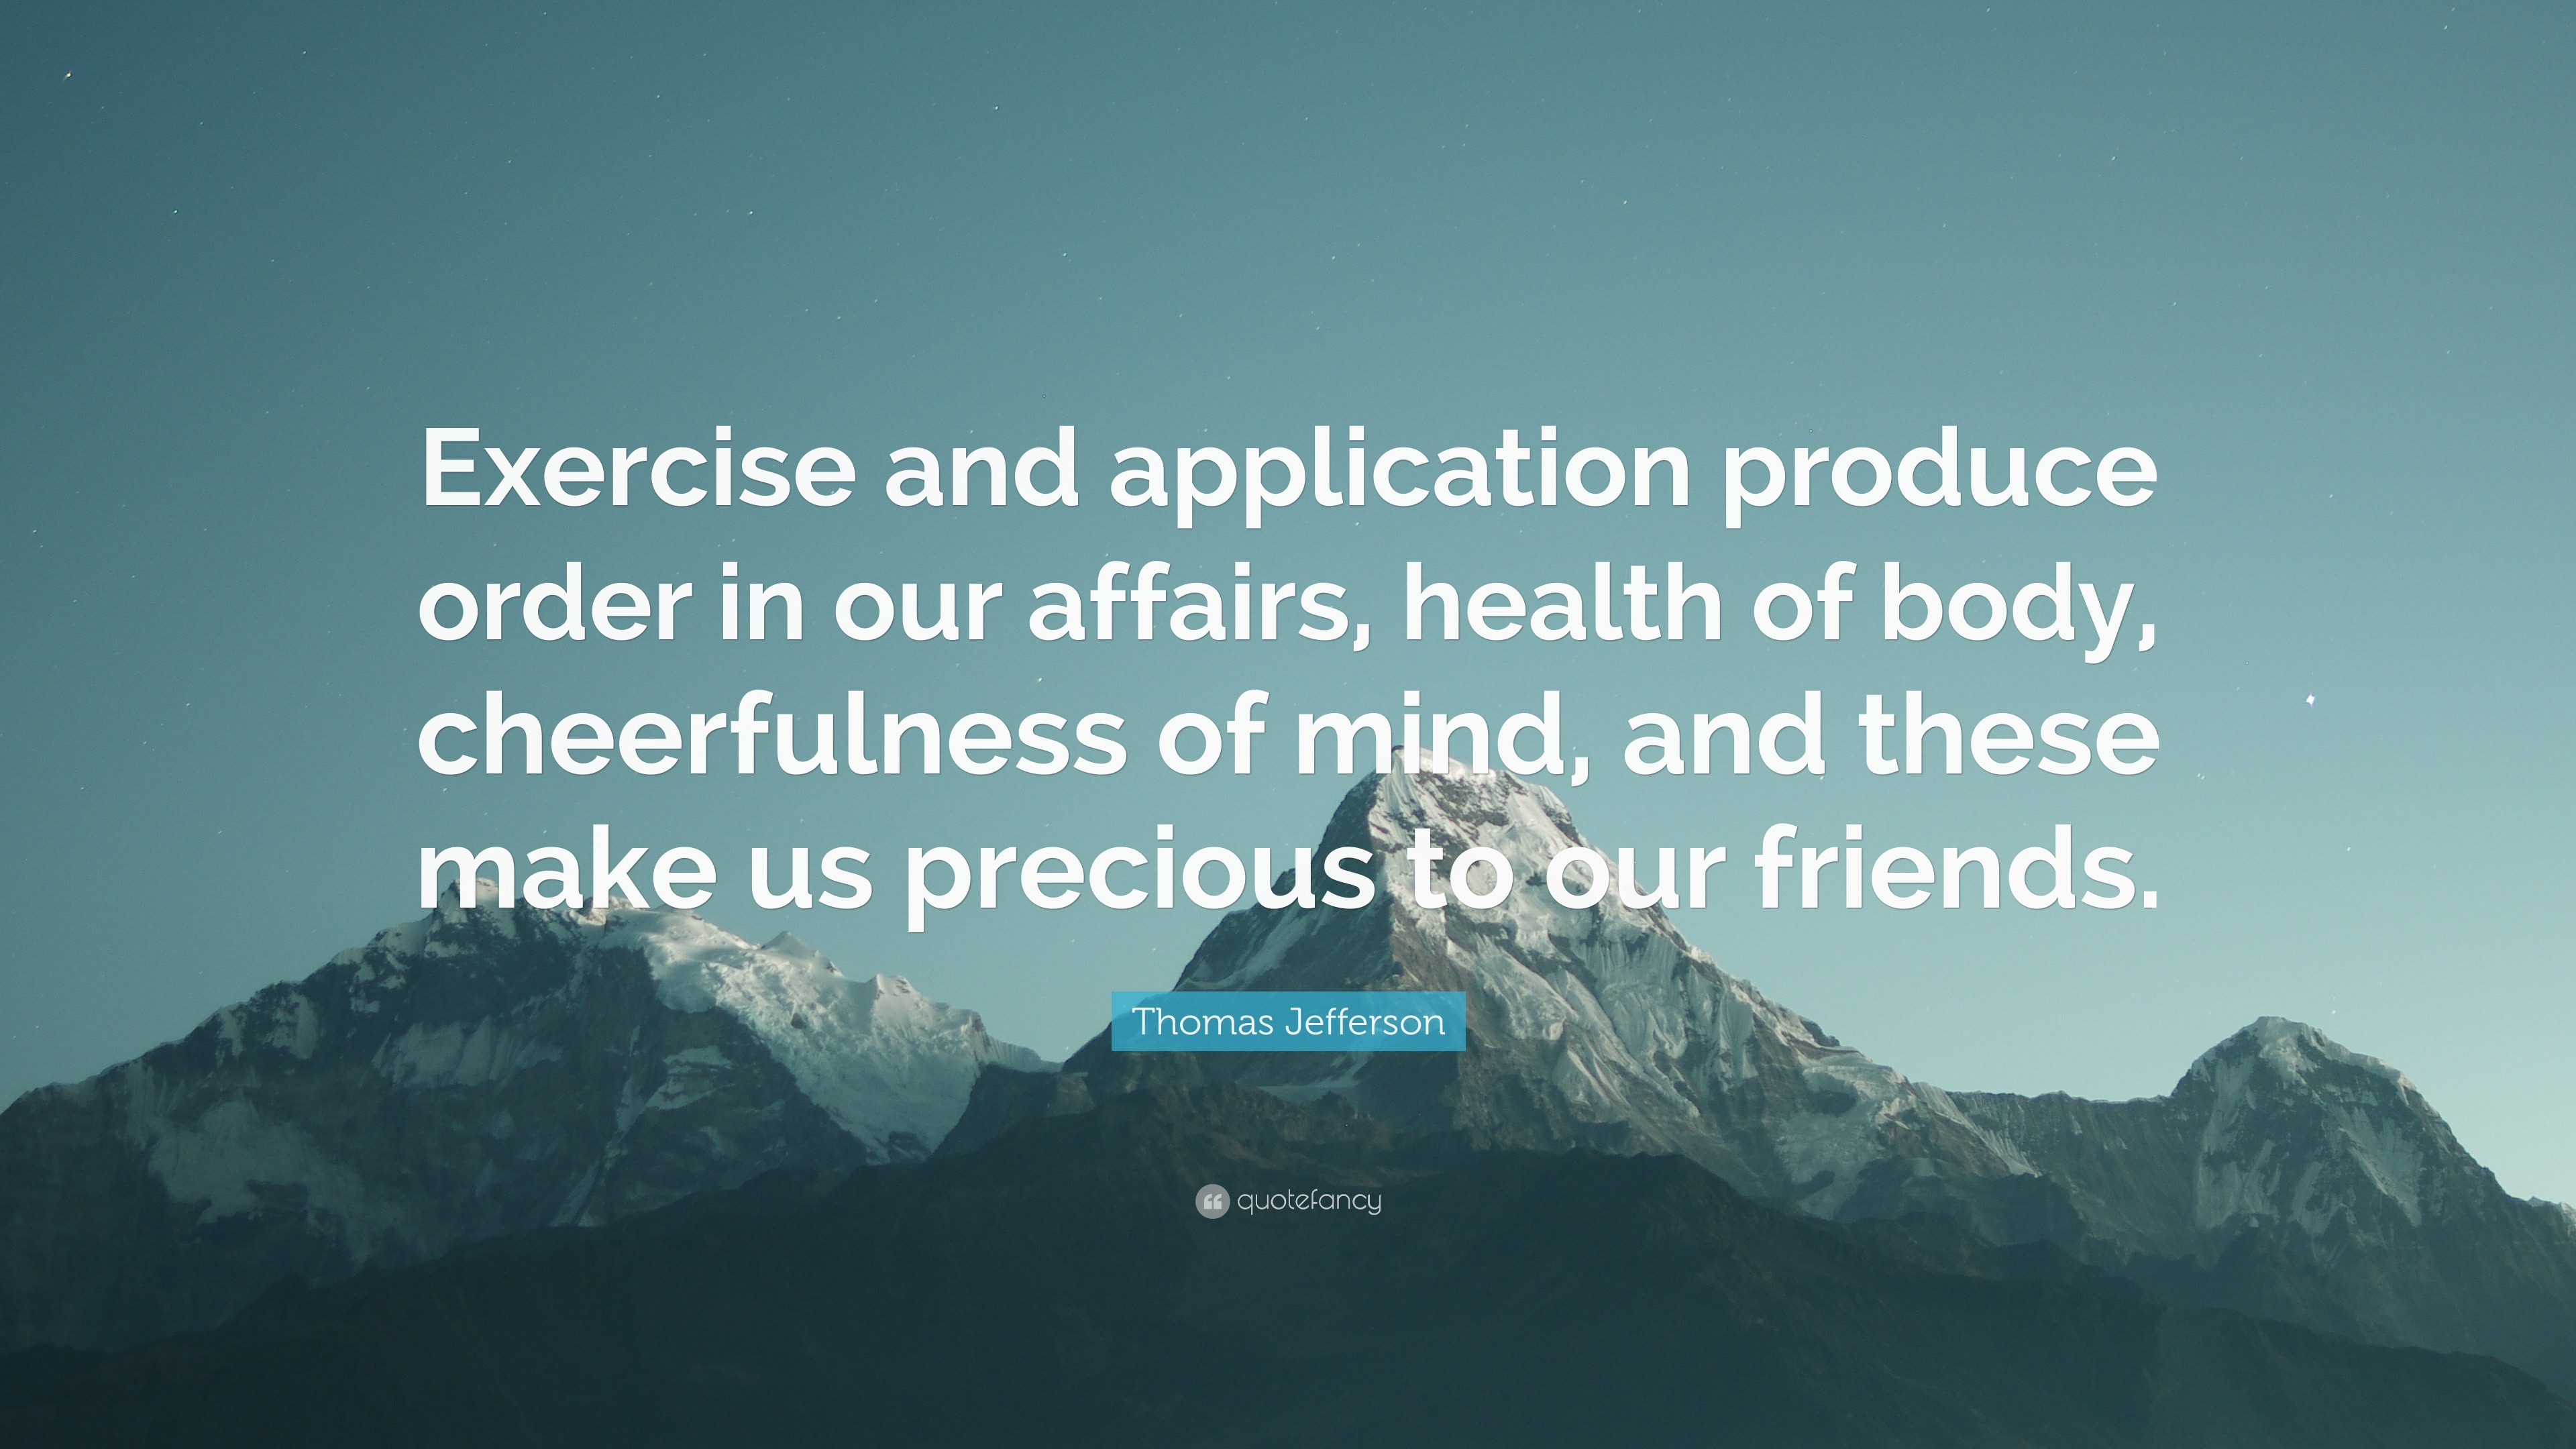 Thomas Jefferson Quote: “Exercise and application produce order in our affairs, health of body, cheerfulness of mind, and these make us precious ...”